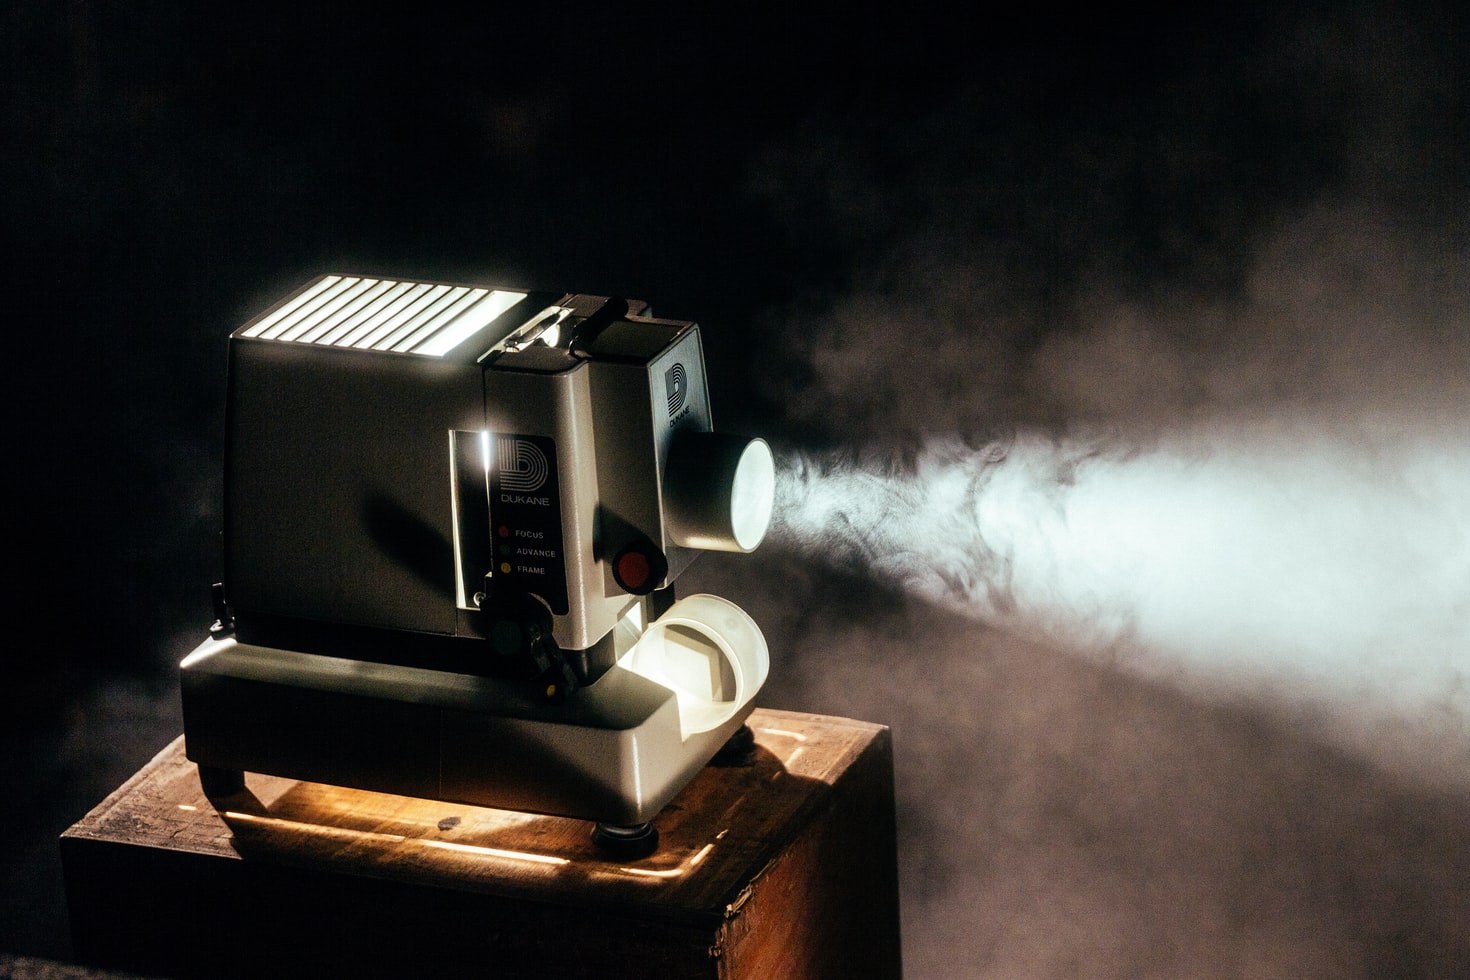 Image of a projector